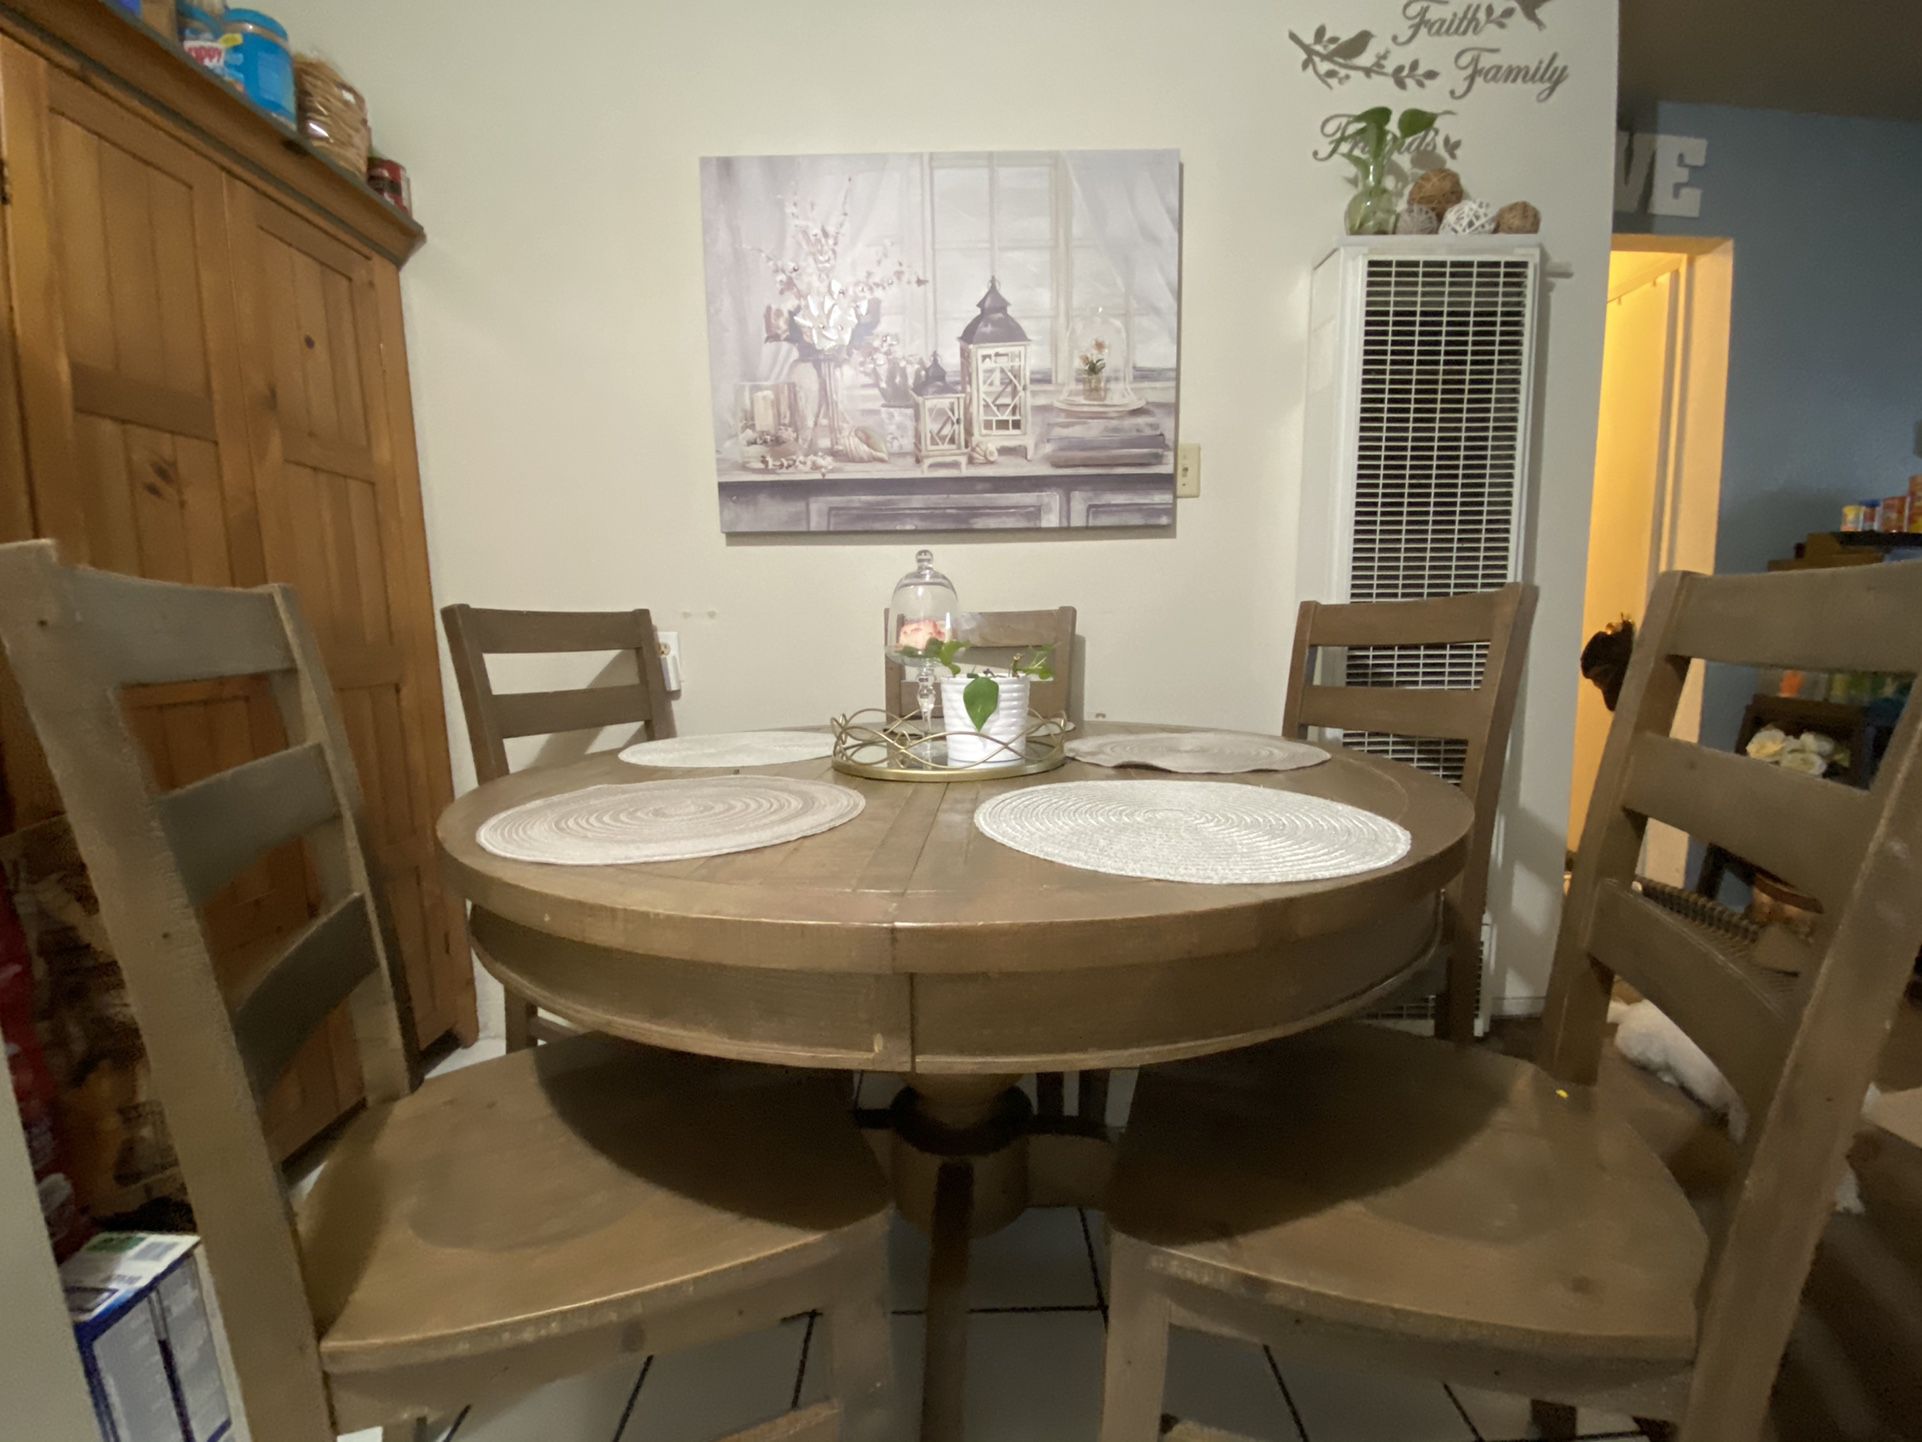 Rustic Woden Table With 5 Chairs (GOOD WOOD)